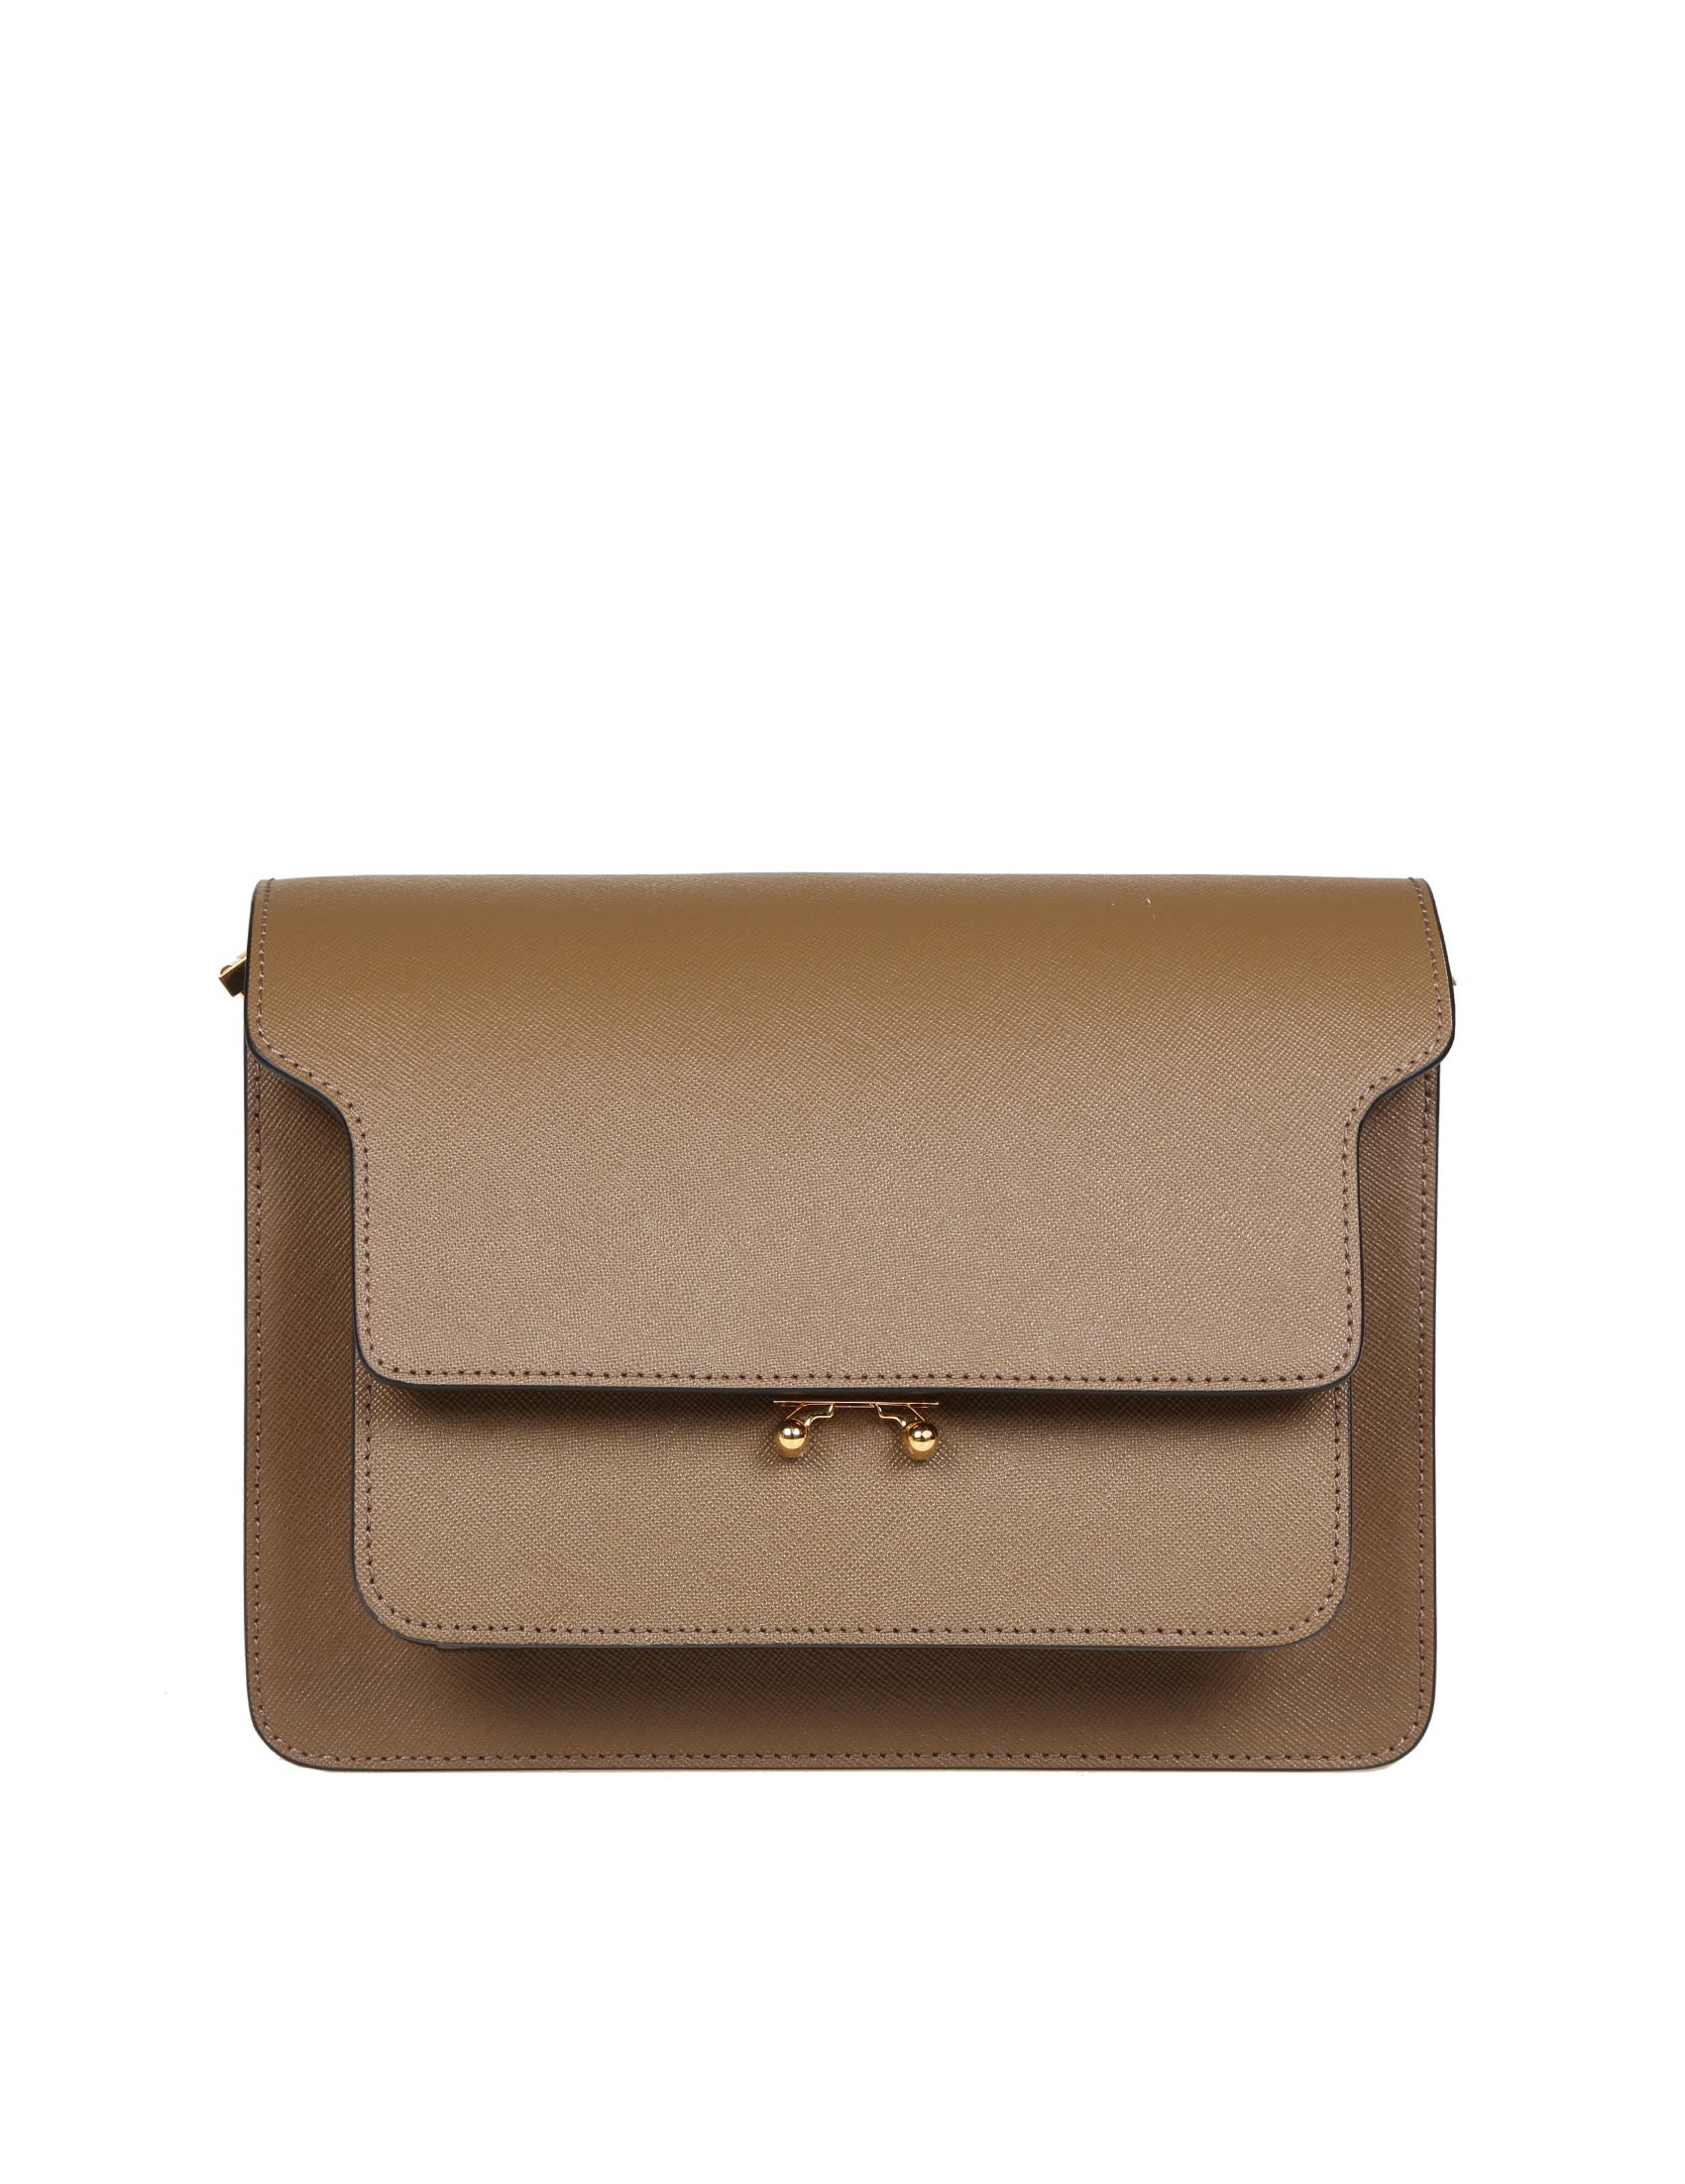 MARNI MEDIUM TRUNK BAG IN TAUPE COLOR LEATHER